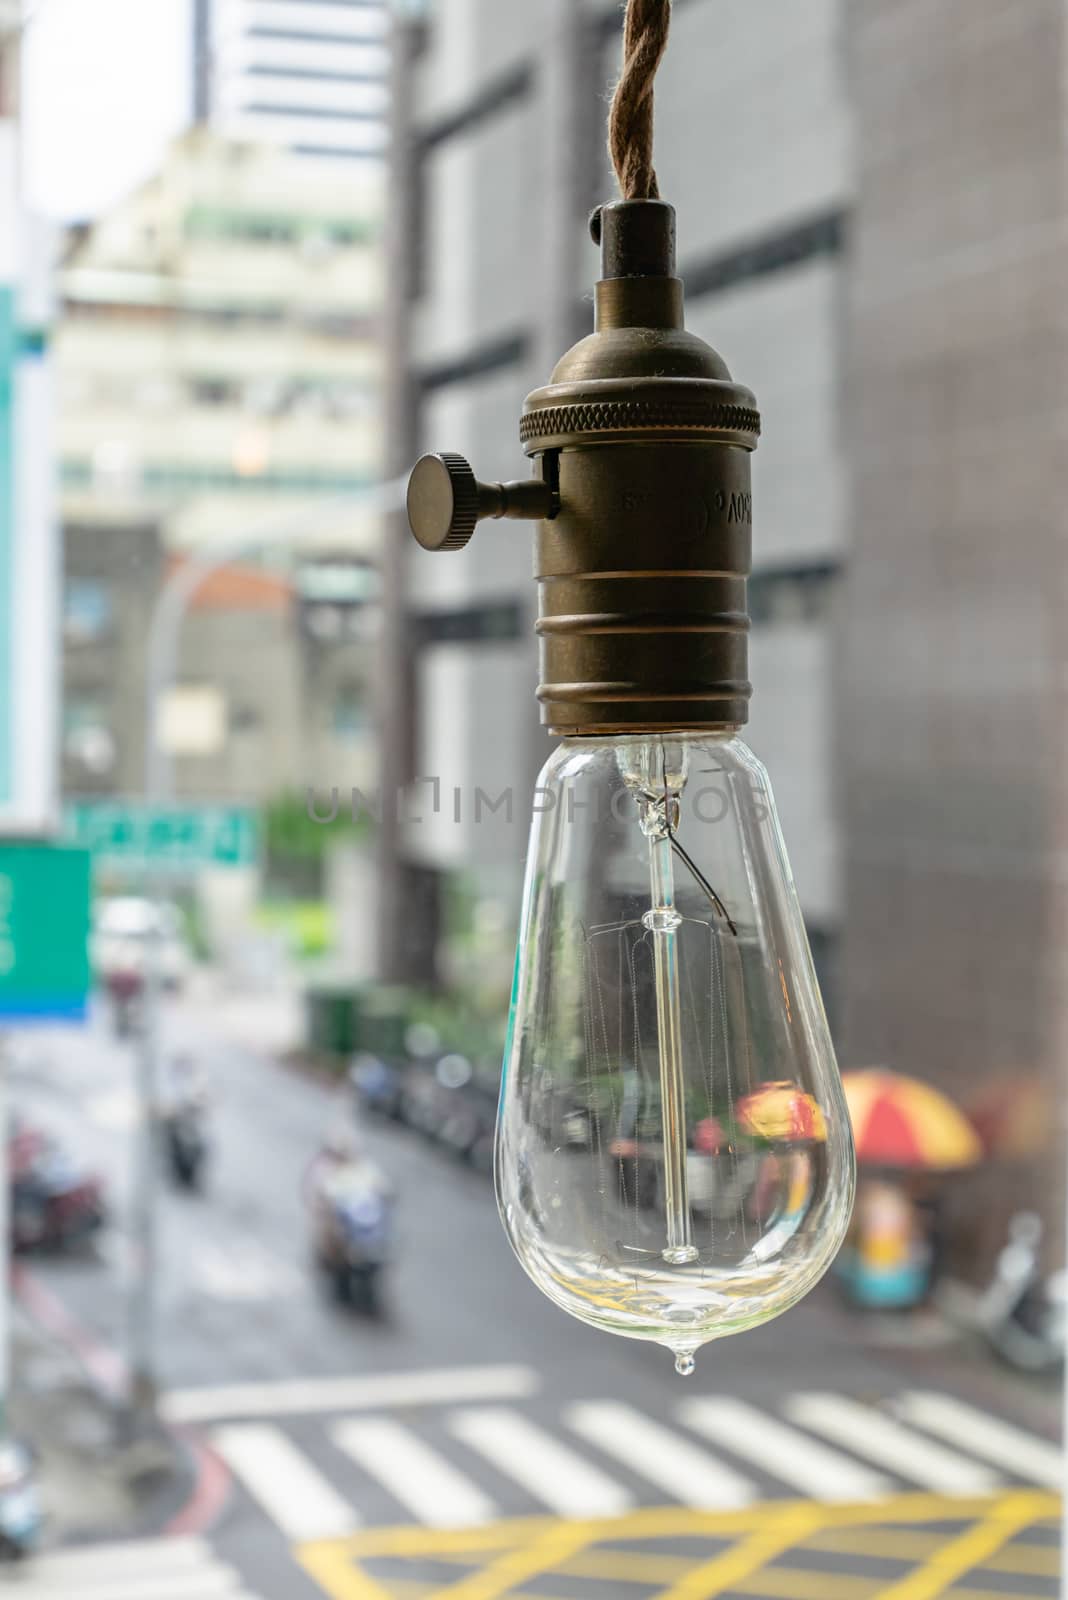 The close up of vintage light bulb aesthetic hanging with downtown background.